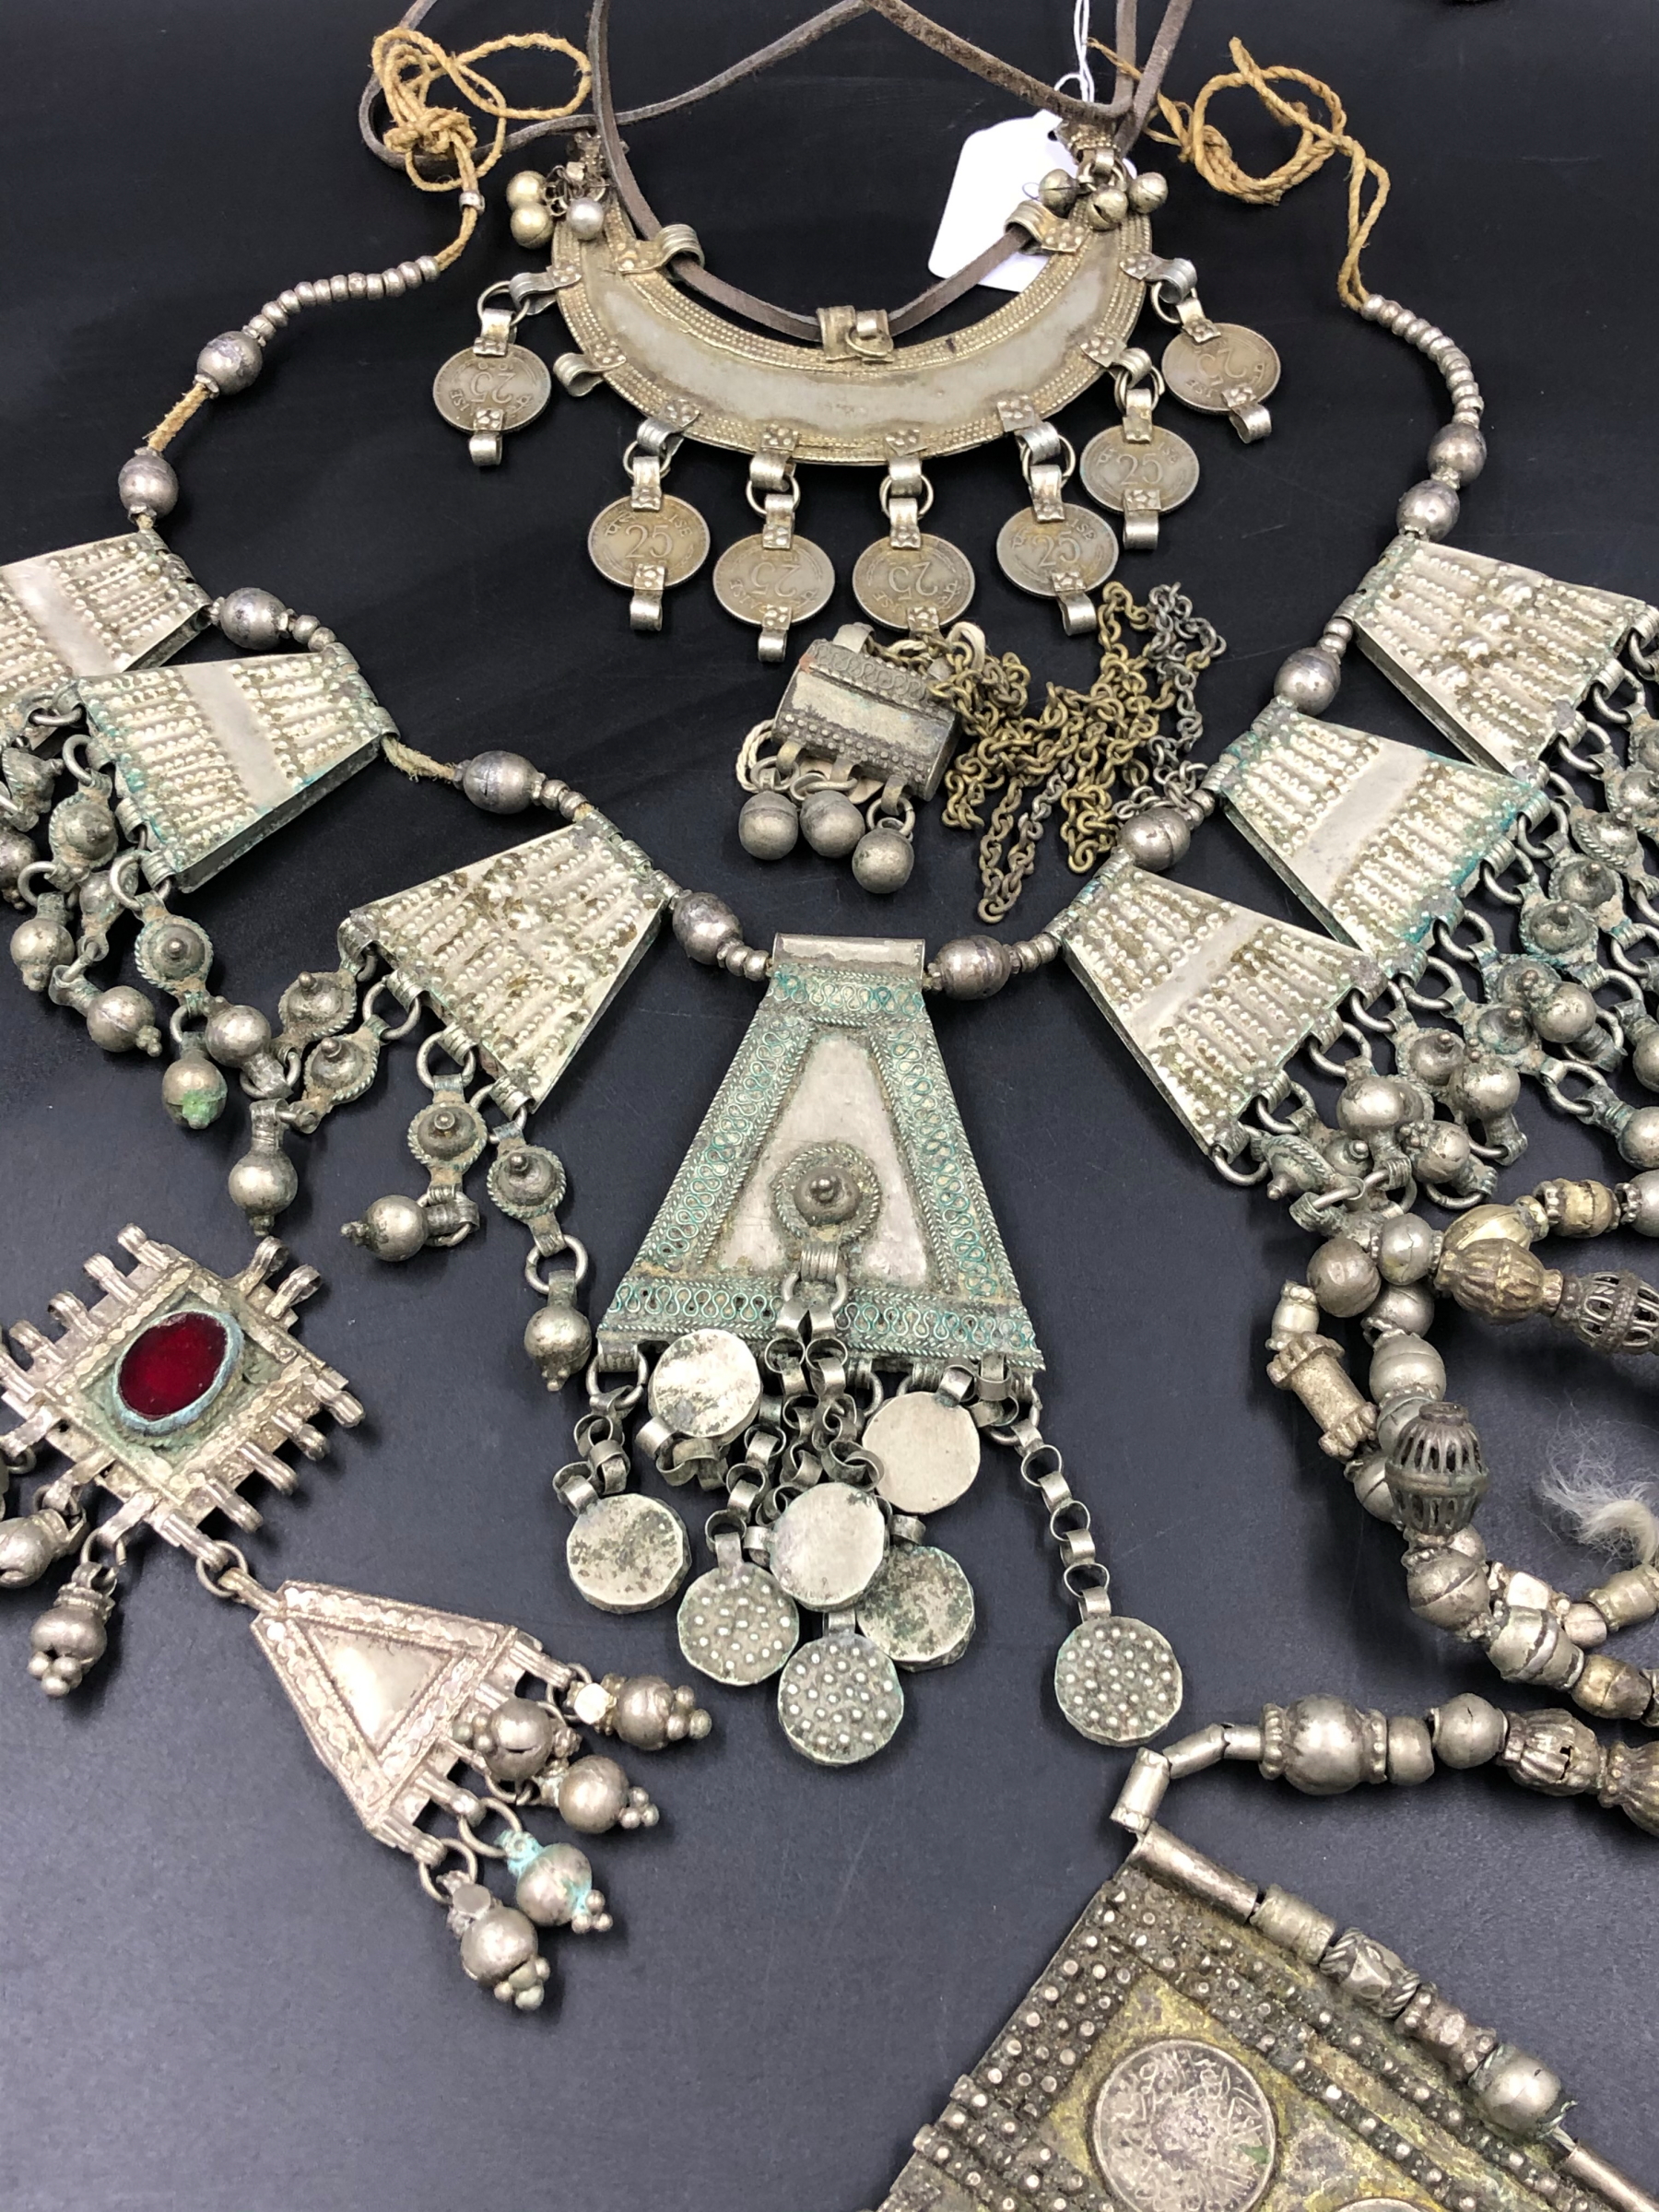 A QUANTITY OF VARIOUS VINTAGE TRIBAL NECKLACES AND ASSOCIATED PARTS INCLUDING STONE INSET AND